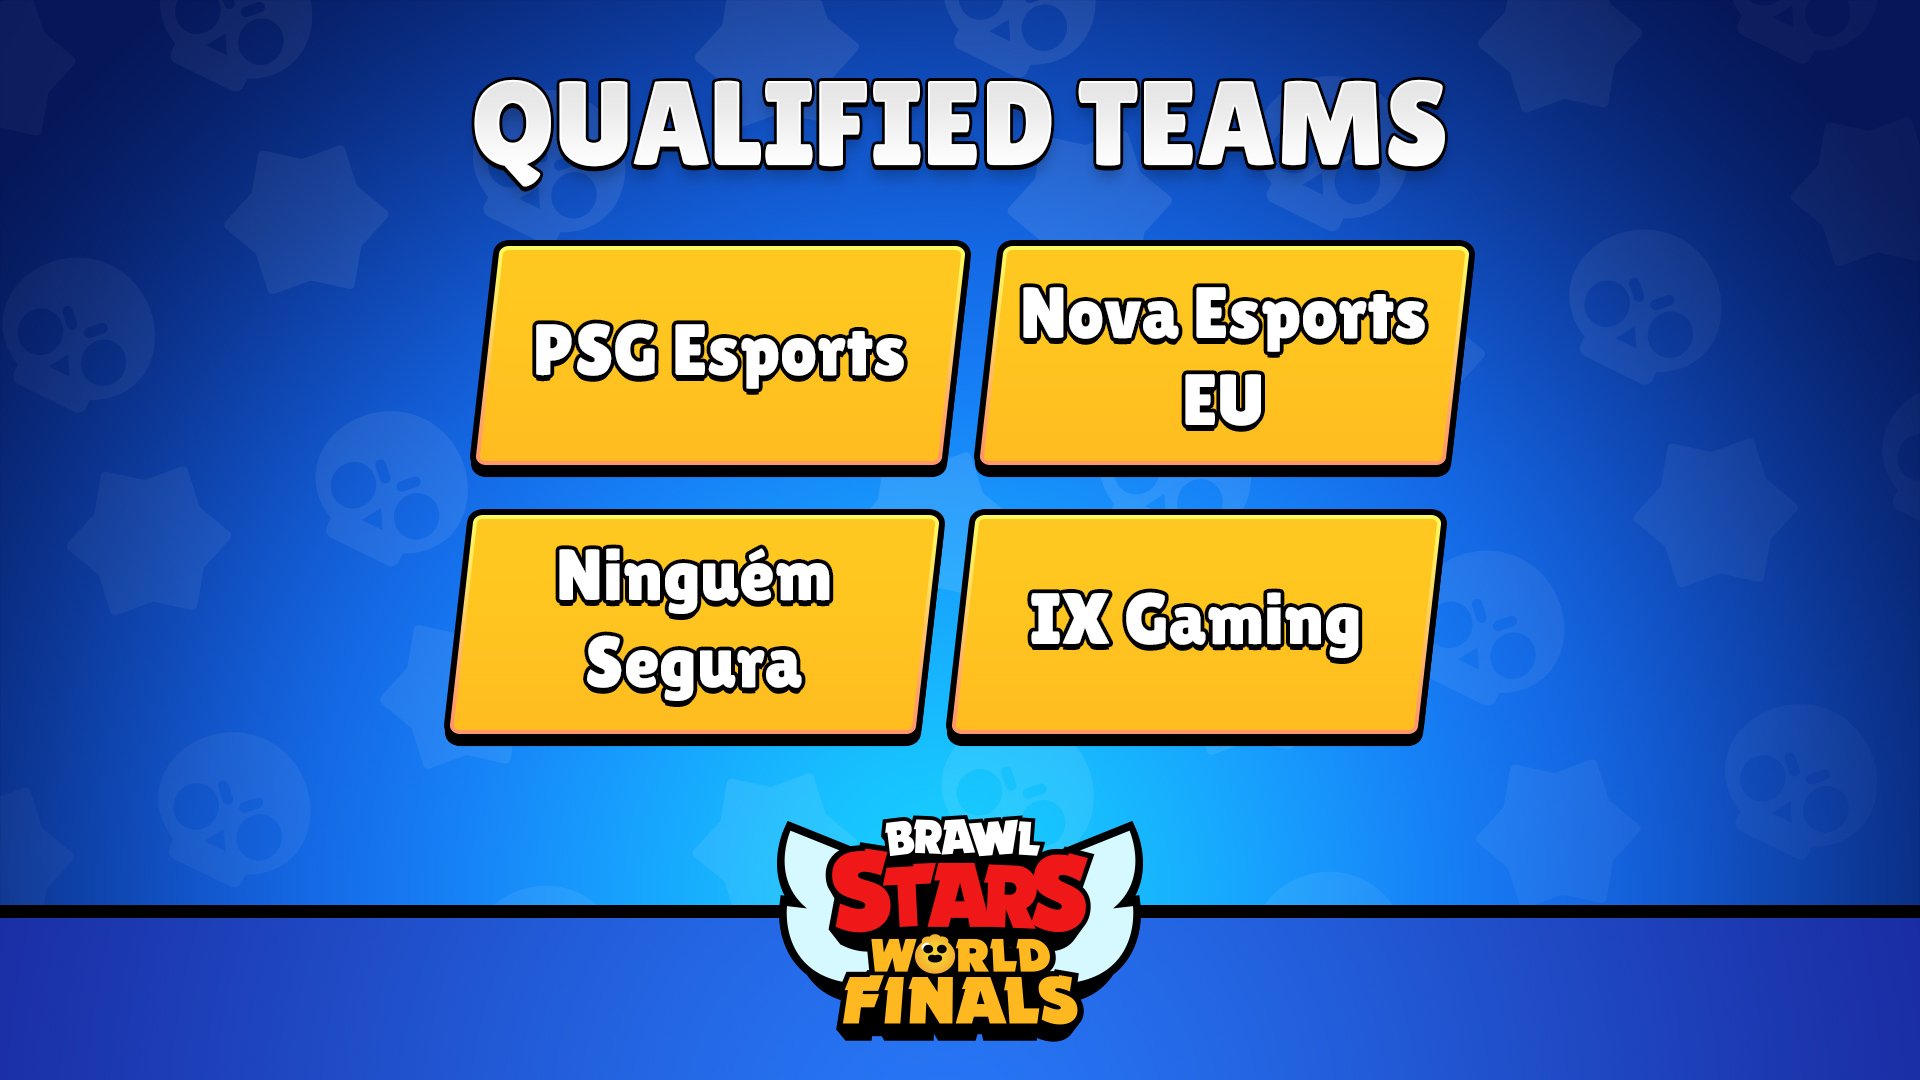 Brawl Stars On Twitter Congratulations To The 4 Western Teams That Have Qualified For The Brawl Stars World Finals In Busan South Korea Here Are The Qualifiers Still To Come - brawl stars world championship sign up